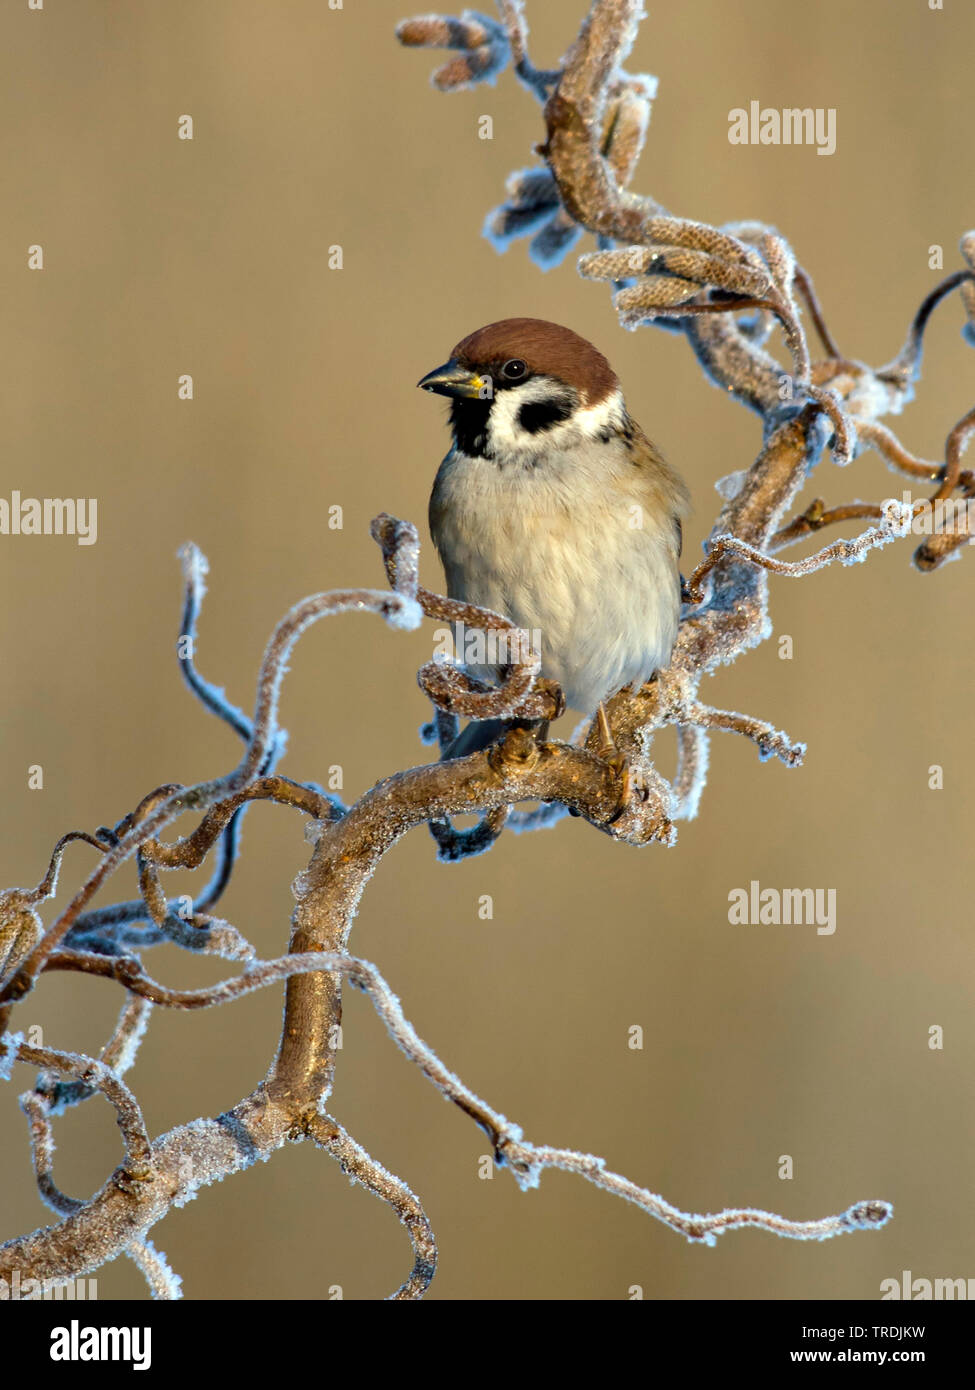 Eurasian tree sparrow (Passer montanus), on a hzel with roar frost, Netherland, Almere Stock Photo